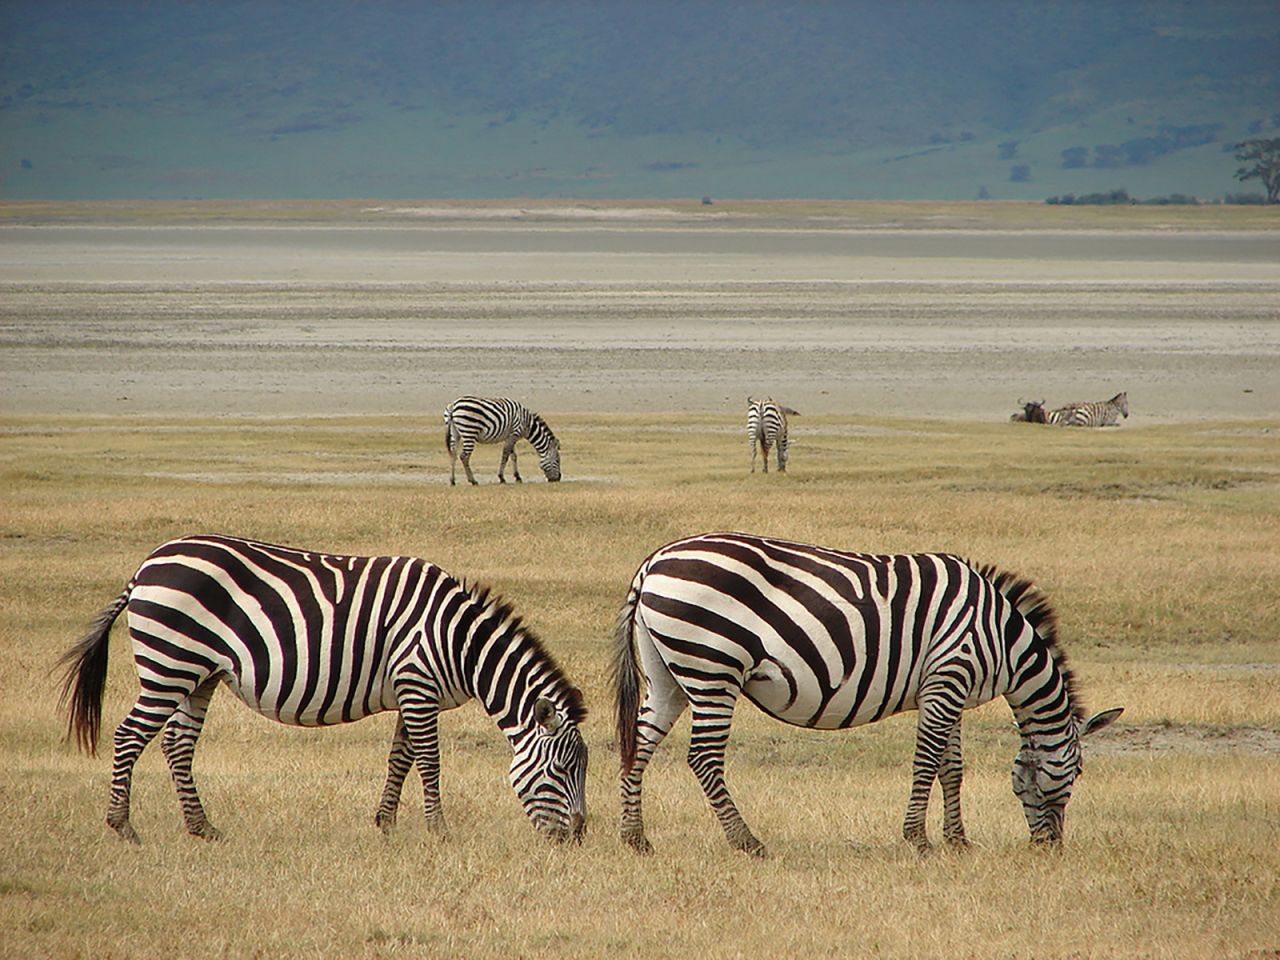 Located in northern Tanzania and spilling into nearby Kenya, where the conservation area is known as the Masai Mara, this iconic savannah hosts the annual migration of 2 million wildebeest, zebra and gazelle followed by their predators, in search of pasture and water. The phenomenal natural spectacle is the largest remaining animal migration in the world.